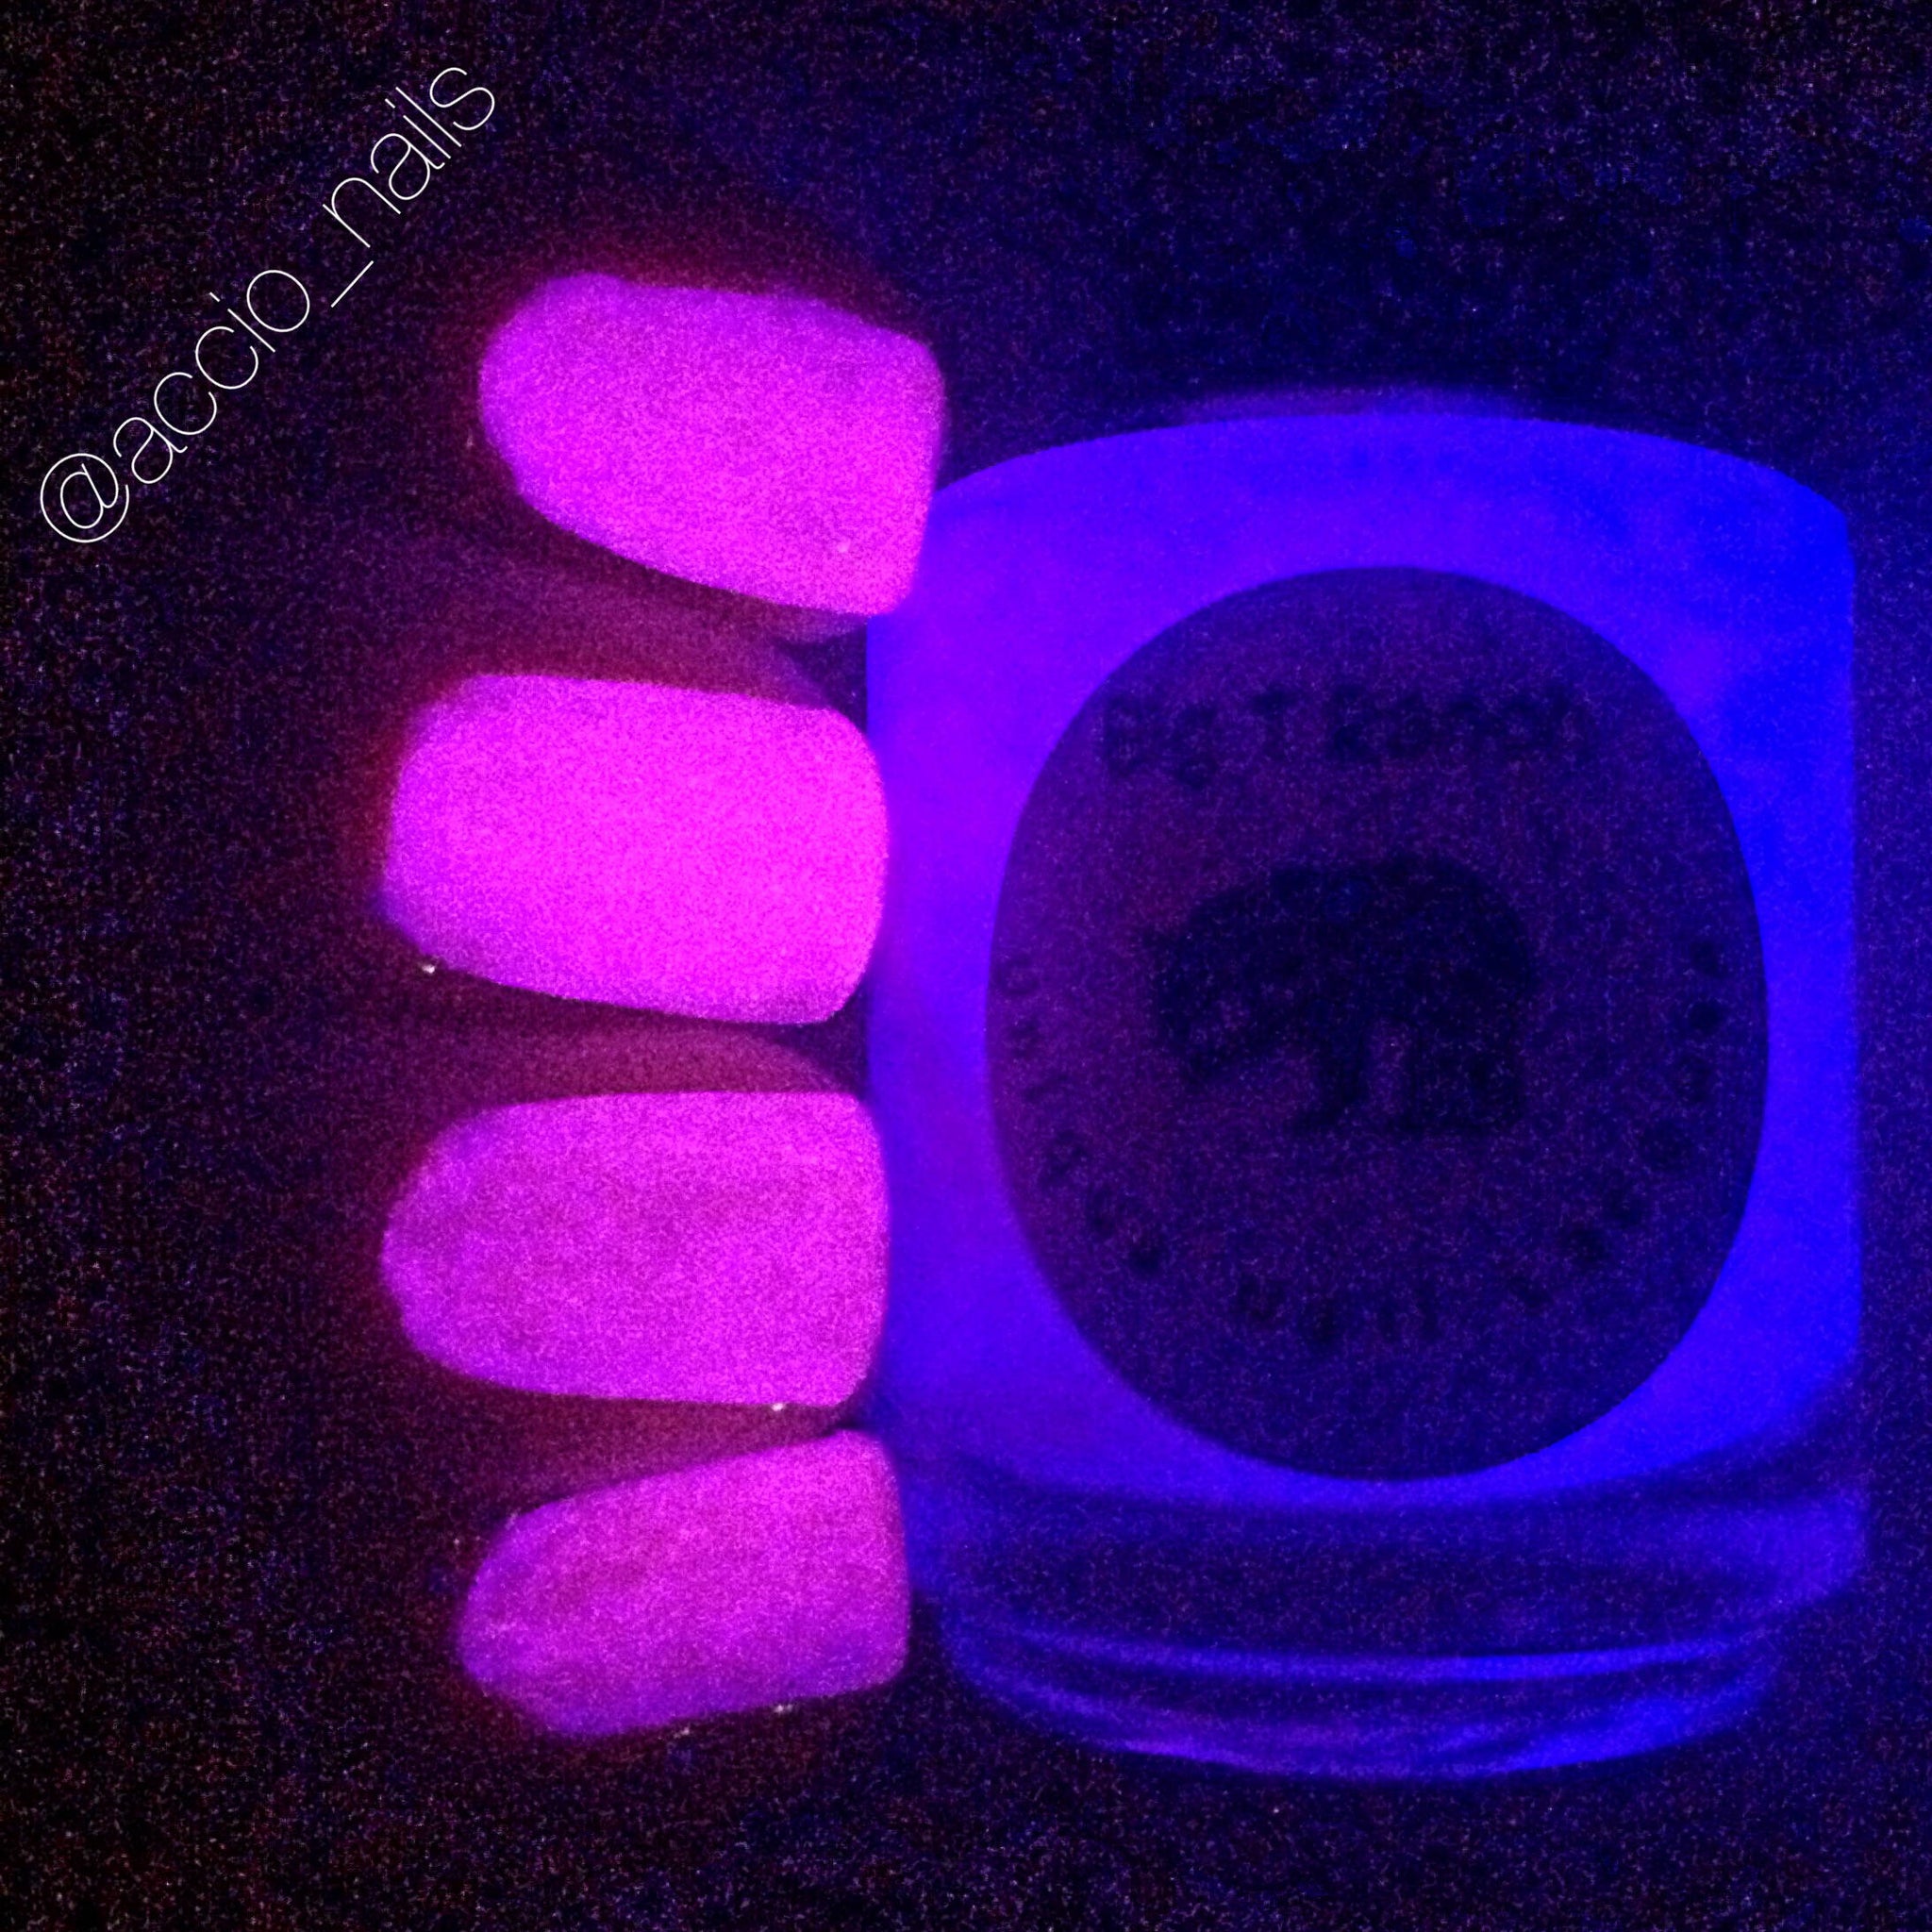 Glow-in-the-Dark Nail Polish, Rose Red, Glows Pink, Pink Moon, Custom  Blended, Glow Nails, FREE U.S. SHIPPING, Full Sized Bottle